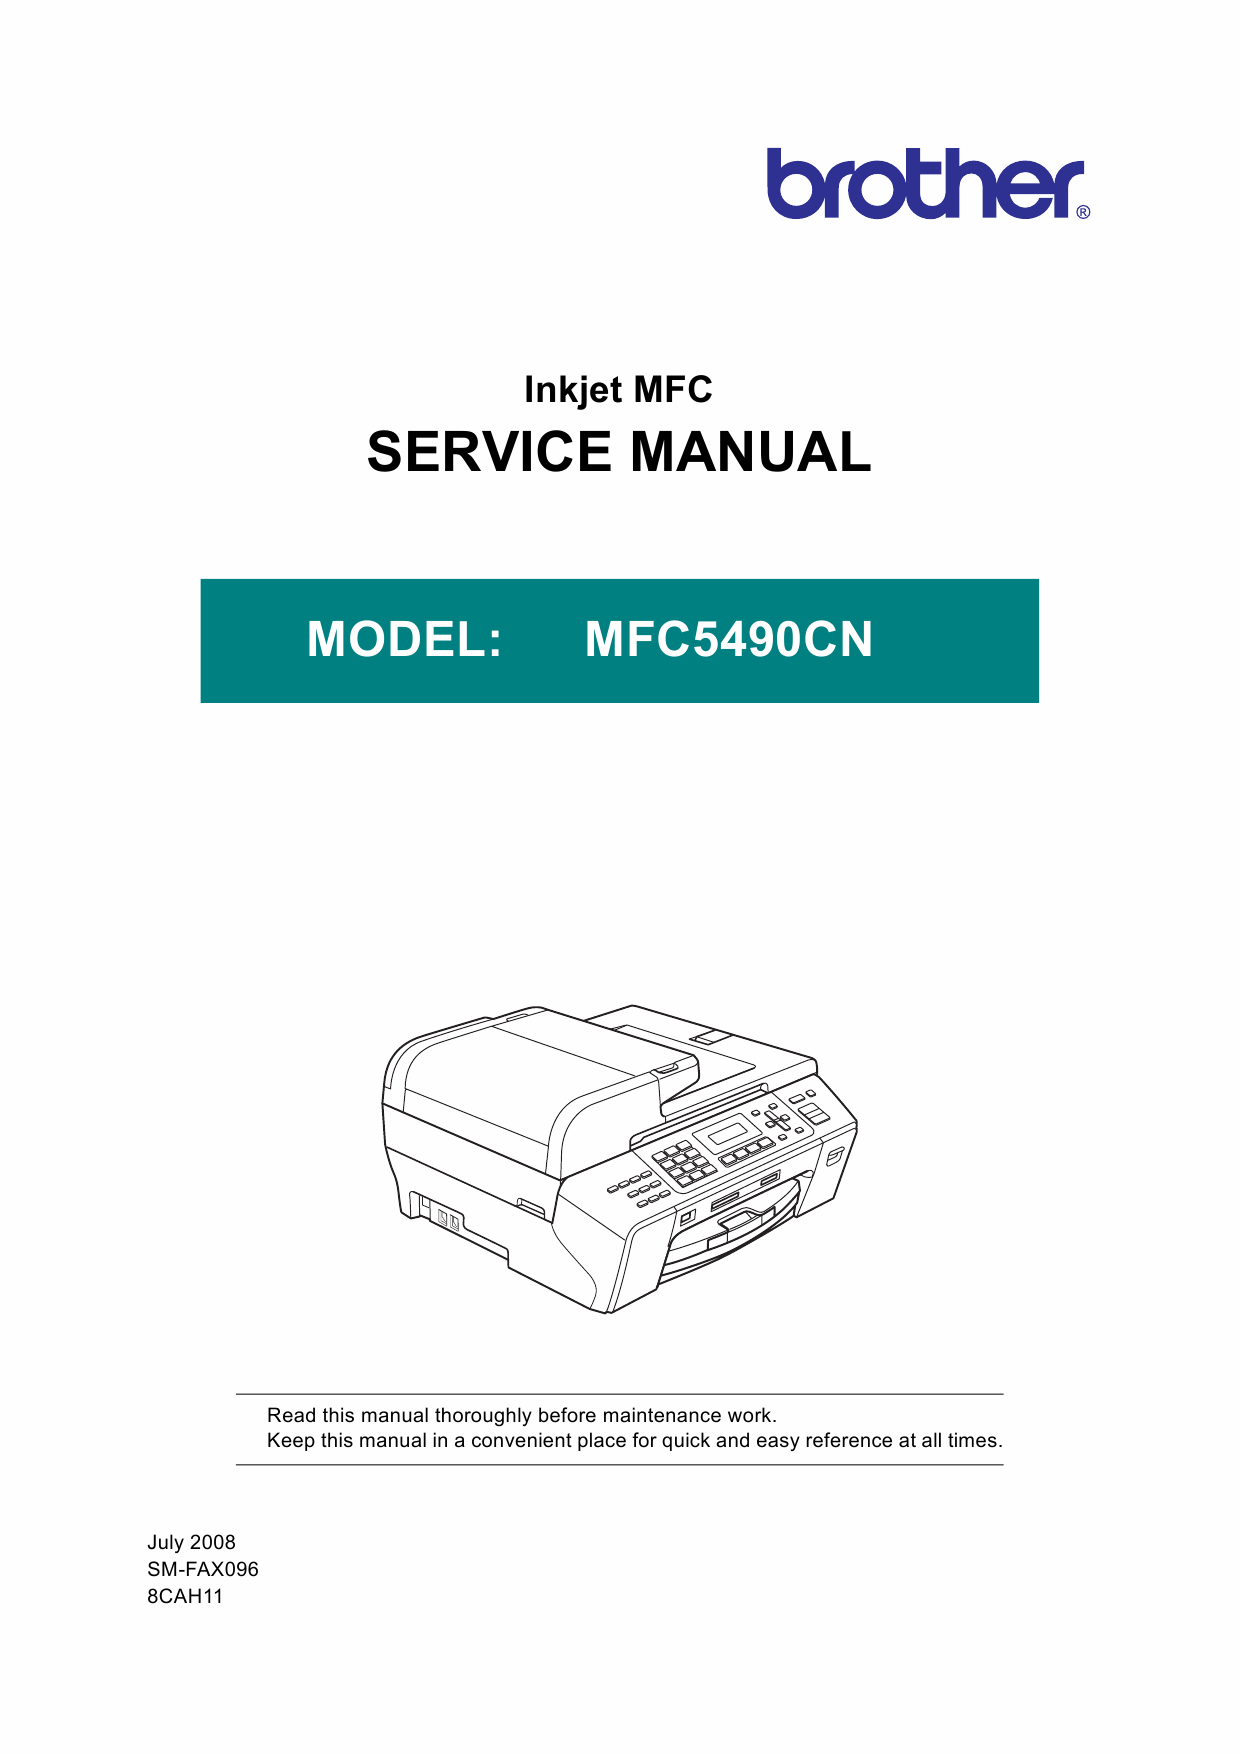 Brother Inkjet-MFC 5490CN Service Manual and Parts-1